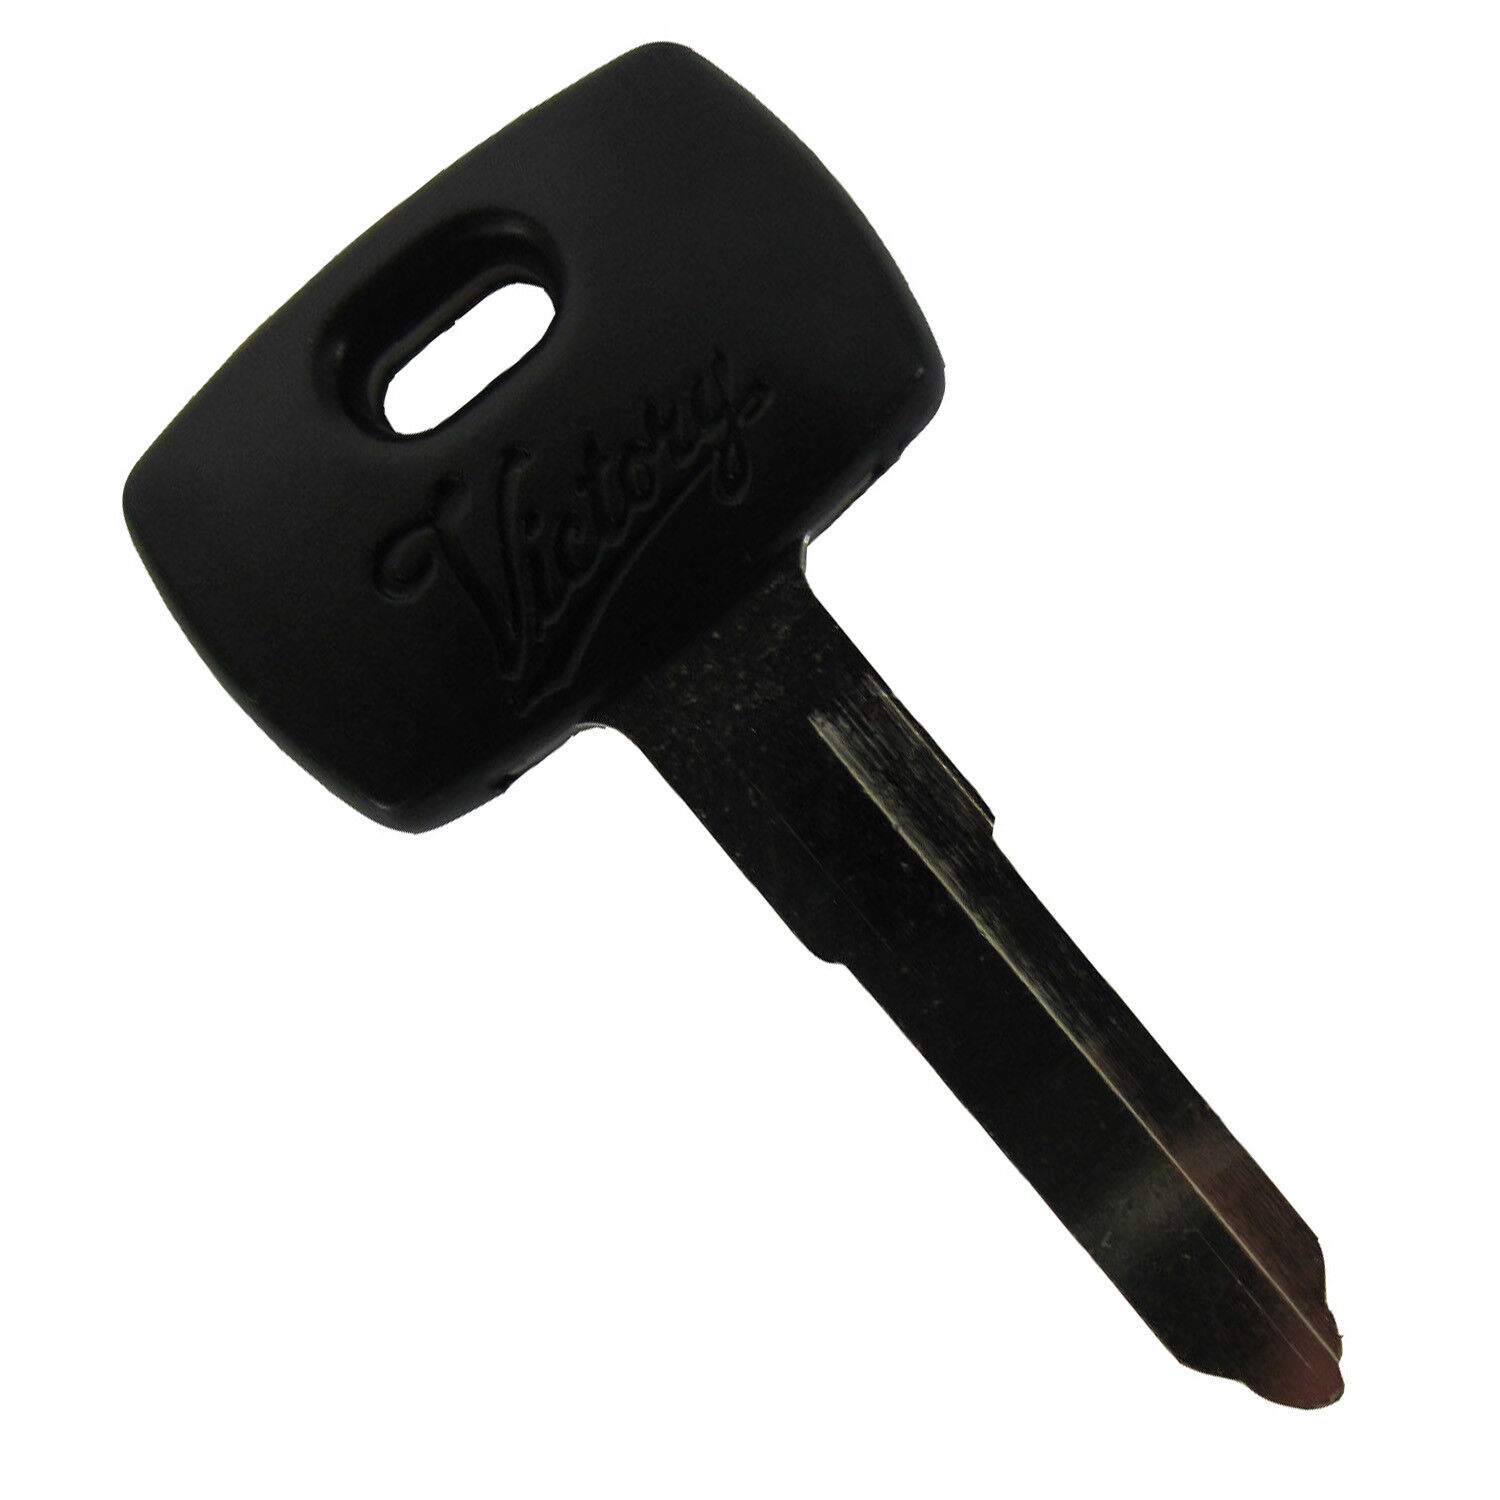 Polaris New OEM Victory Motorcycle Blank Ignition Key Deluxe, Standard, Sport